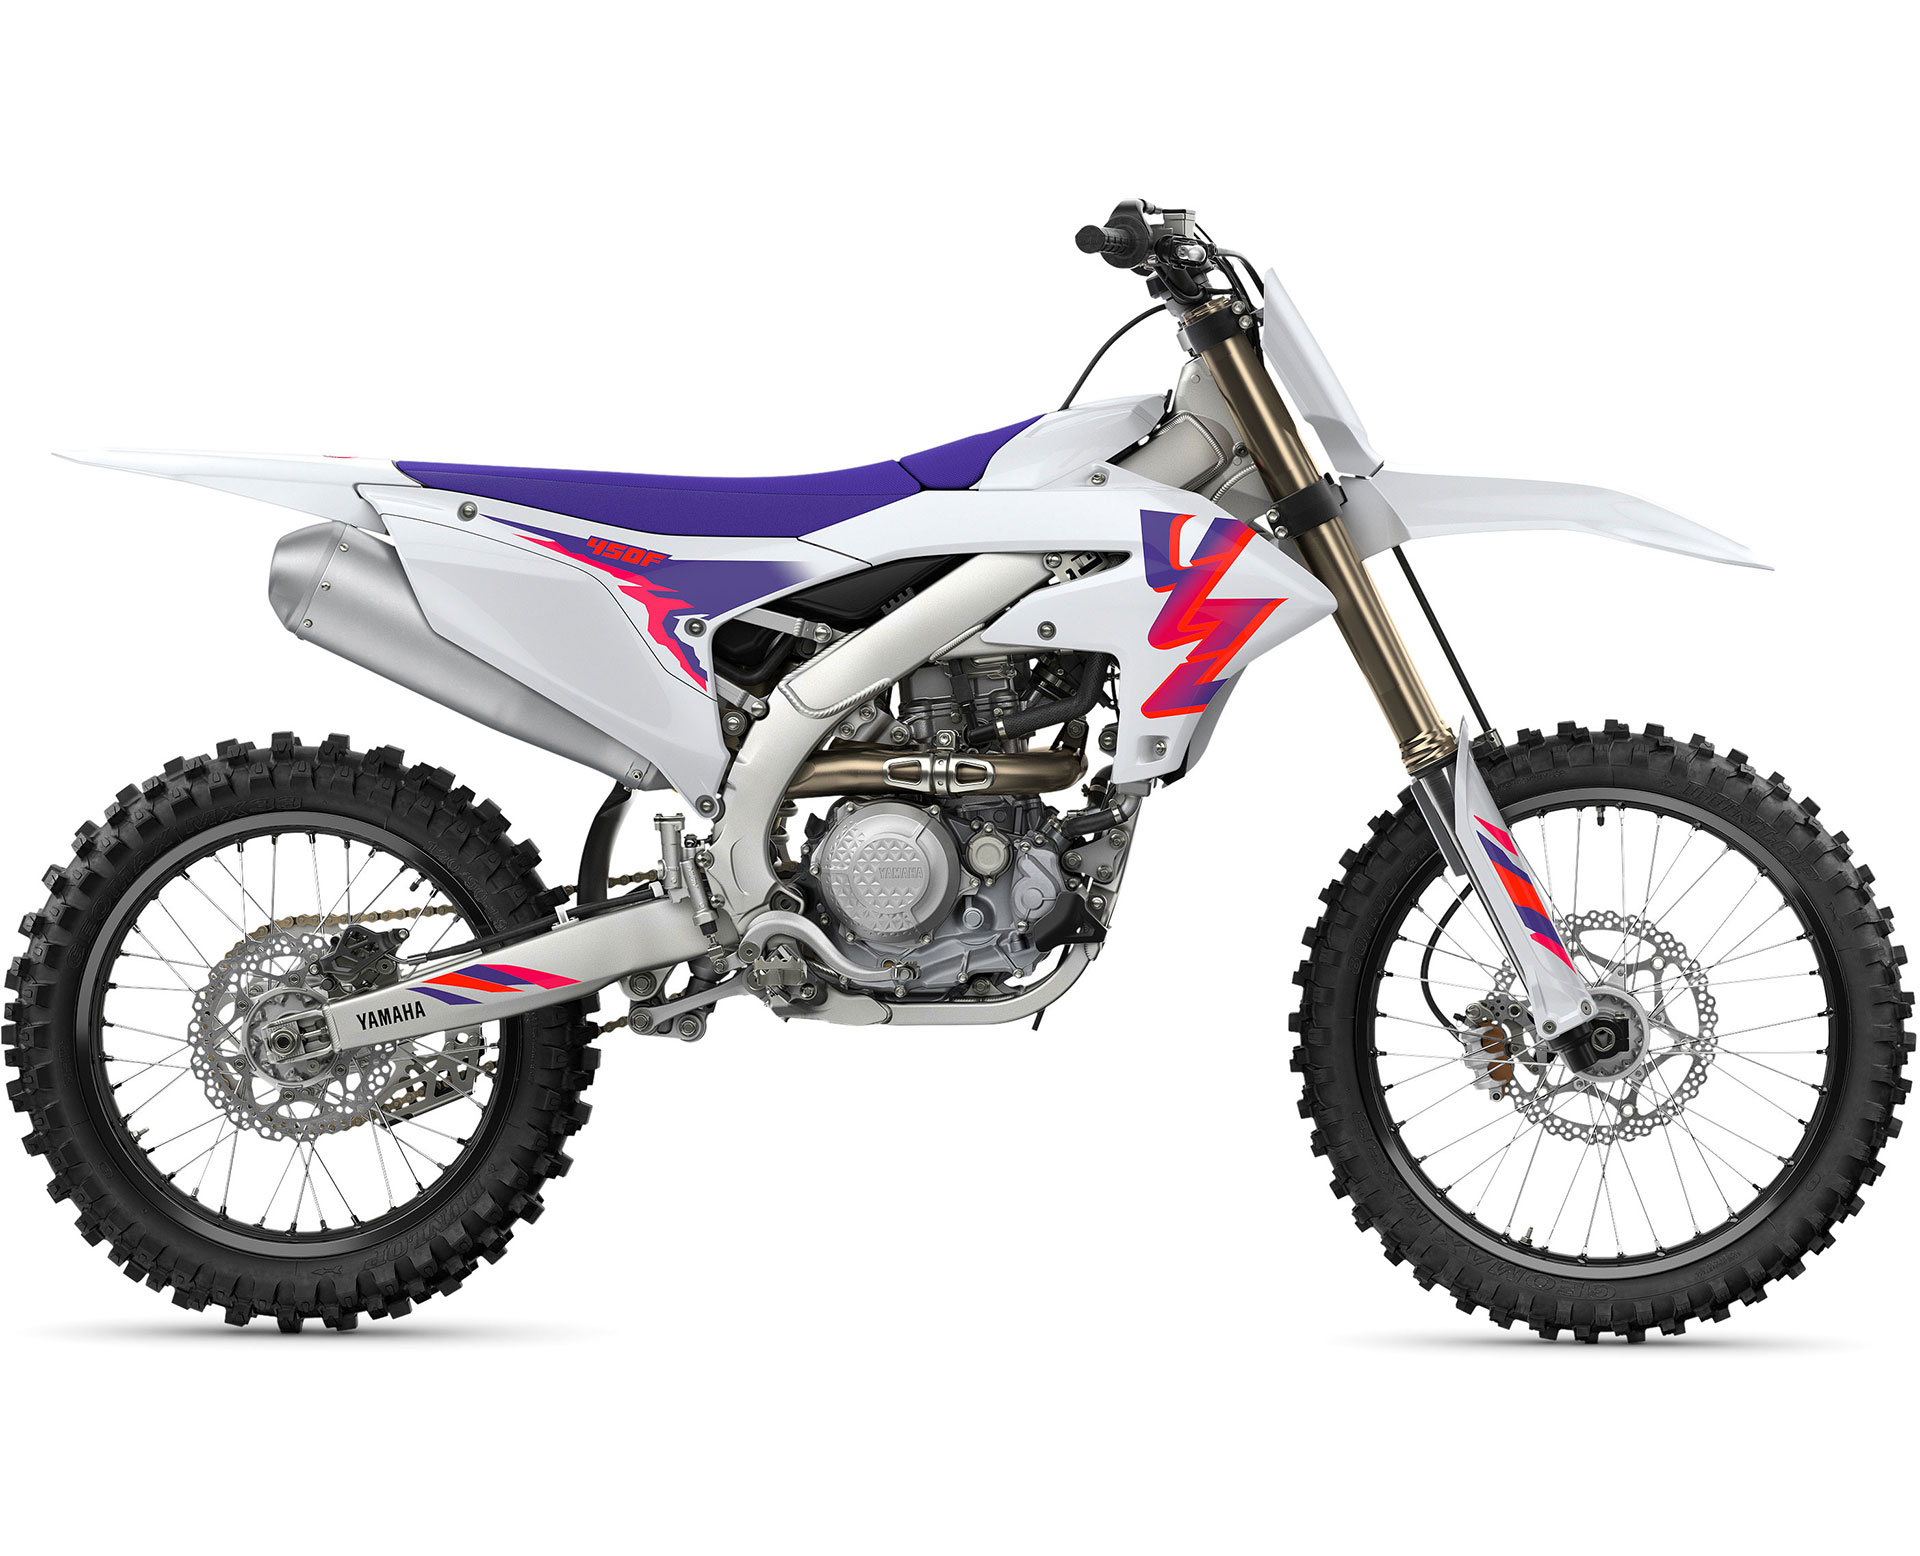 Thumbnail of your customized 2024 YZ450F